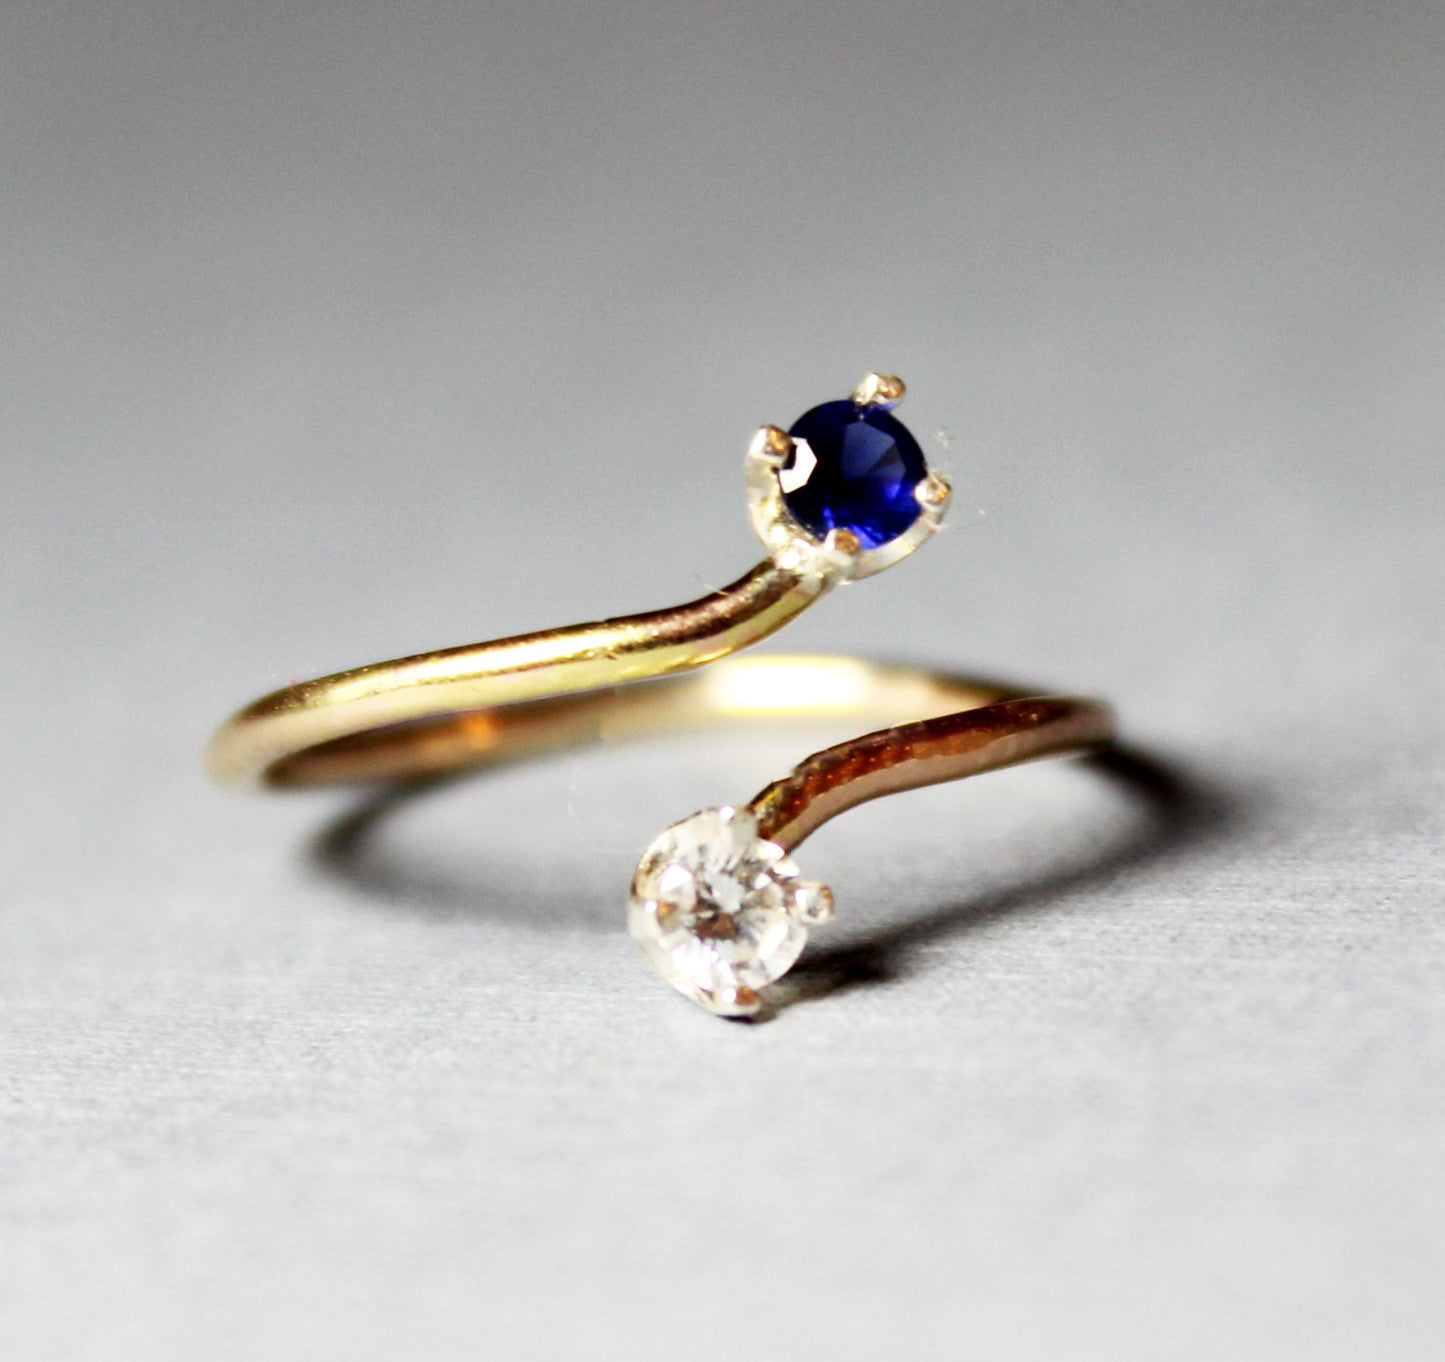 Dual Birthstone Ring - Saphhire and Diamond Cubic Zirconia Ring - 14K Gold Filled Ring -Double Birthstone Ring